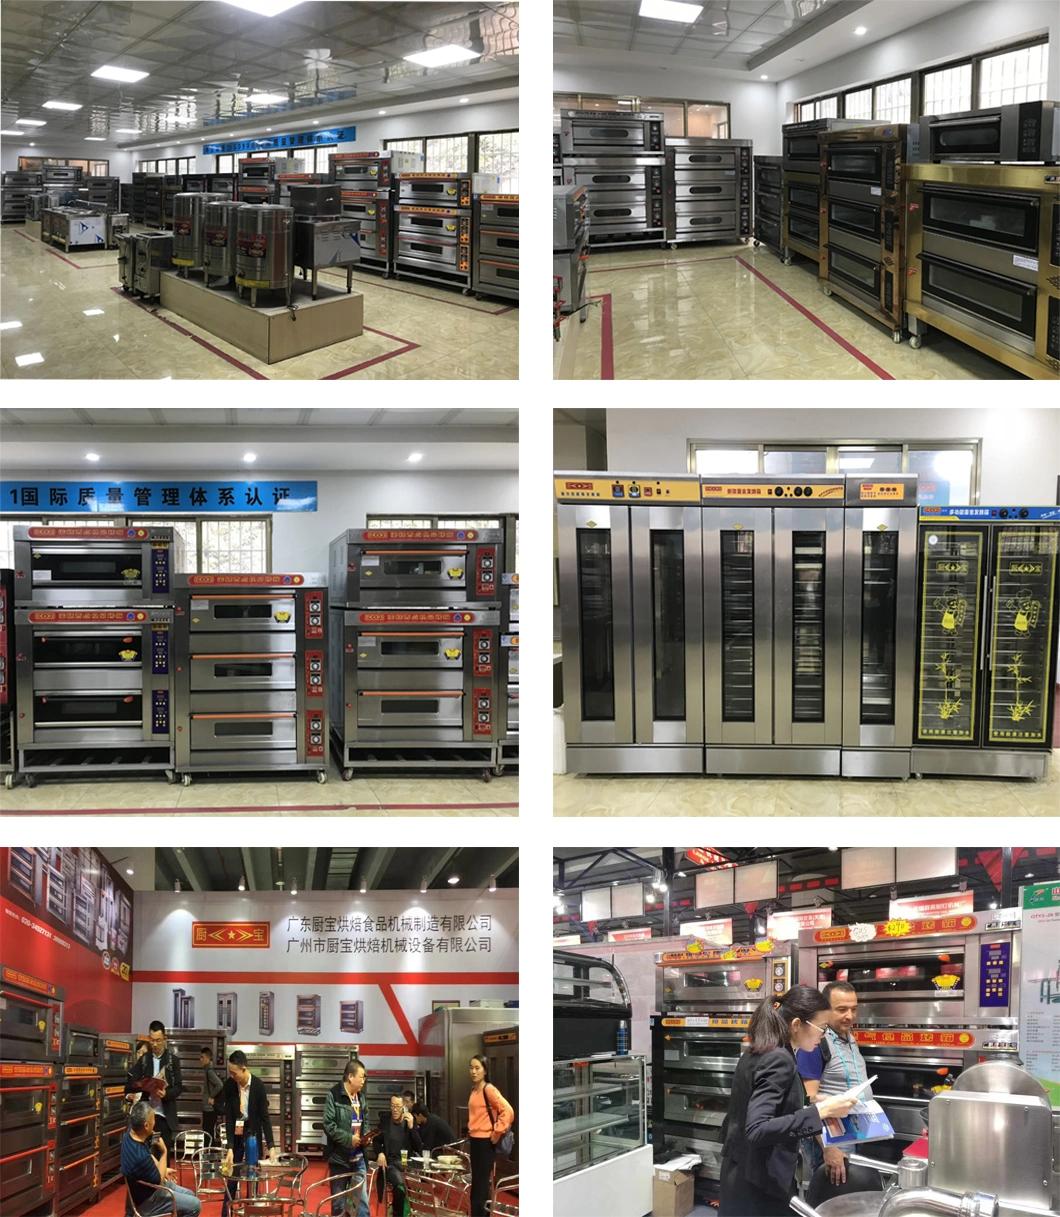 3 Deck 6 Trays Luxury Electric Oven for Commercial Restaurant Kitchen Baking Equipment Bakery Machinery Food Machine with Computer Controller Cake Oven